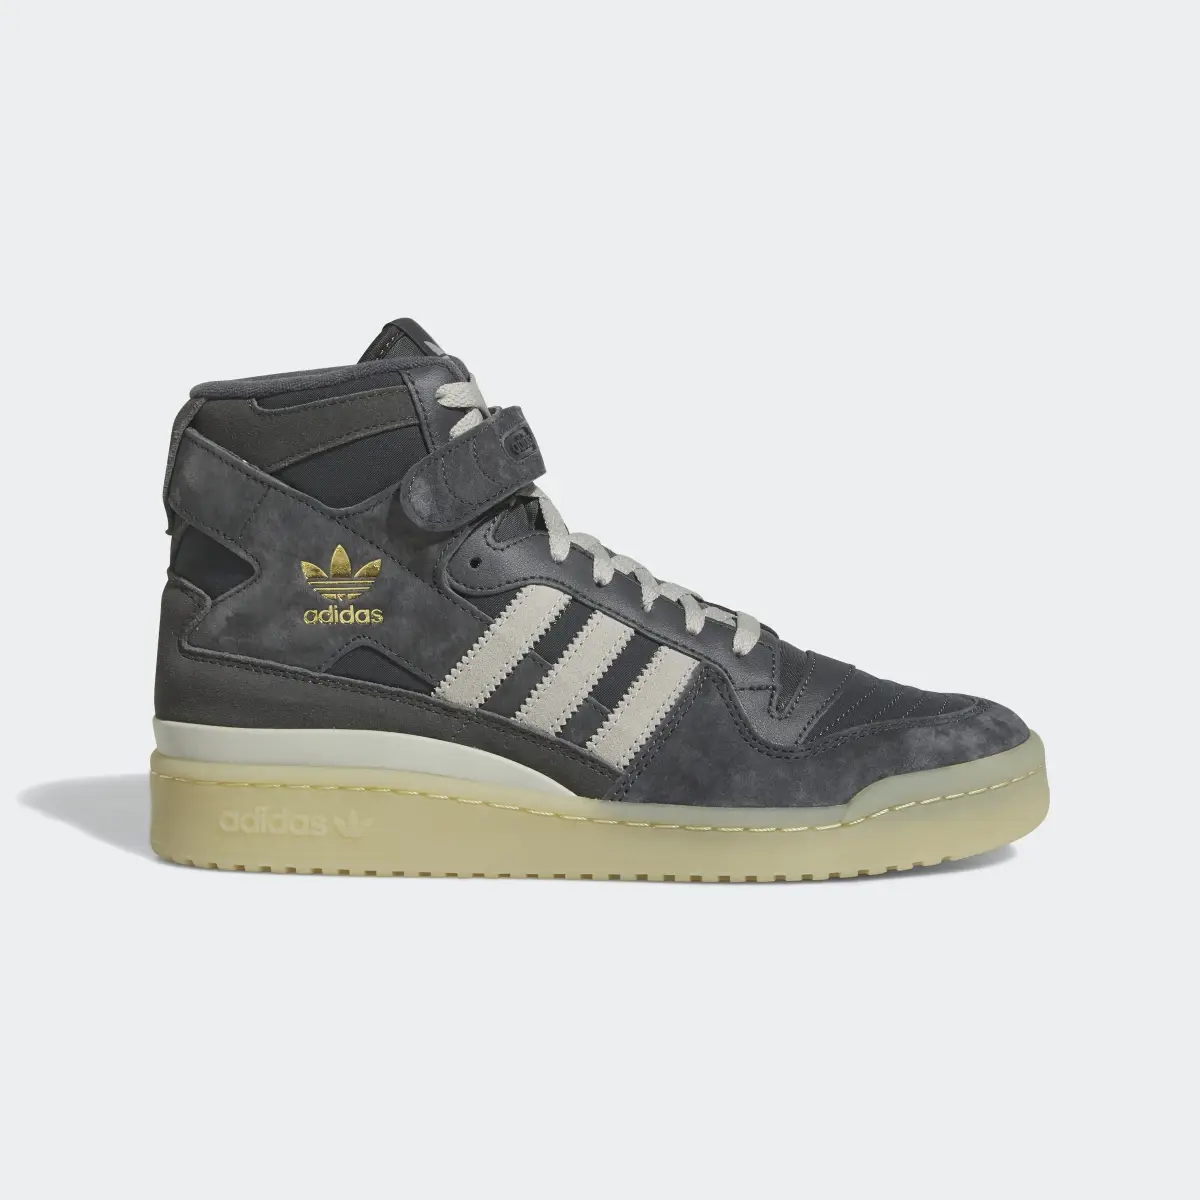 Adidas Forum Mid Shoes. 2